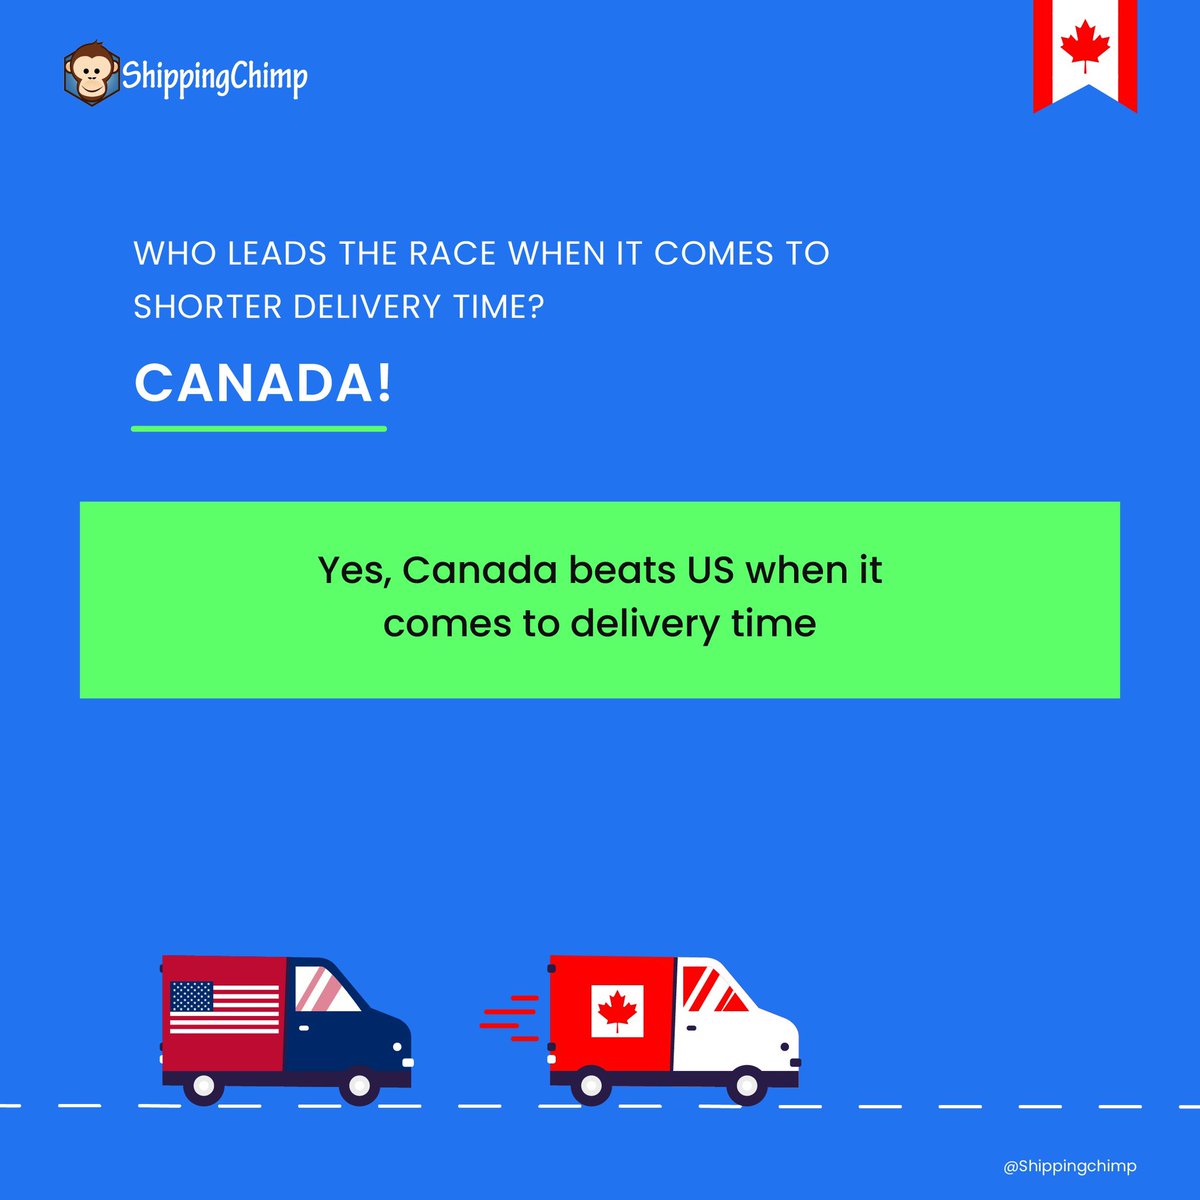 We care a lot about making your delivery times shorter and we know that everyone appreciates a short delivery time. So, which country provides the shortest delivery time? ⬇️

#ecommerce #logistics #shorterdeliverytime #quickdelivery #shippingchimp